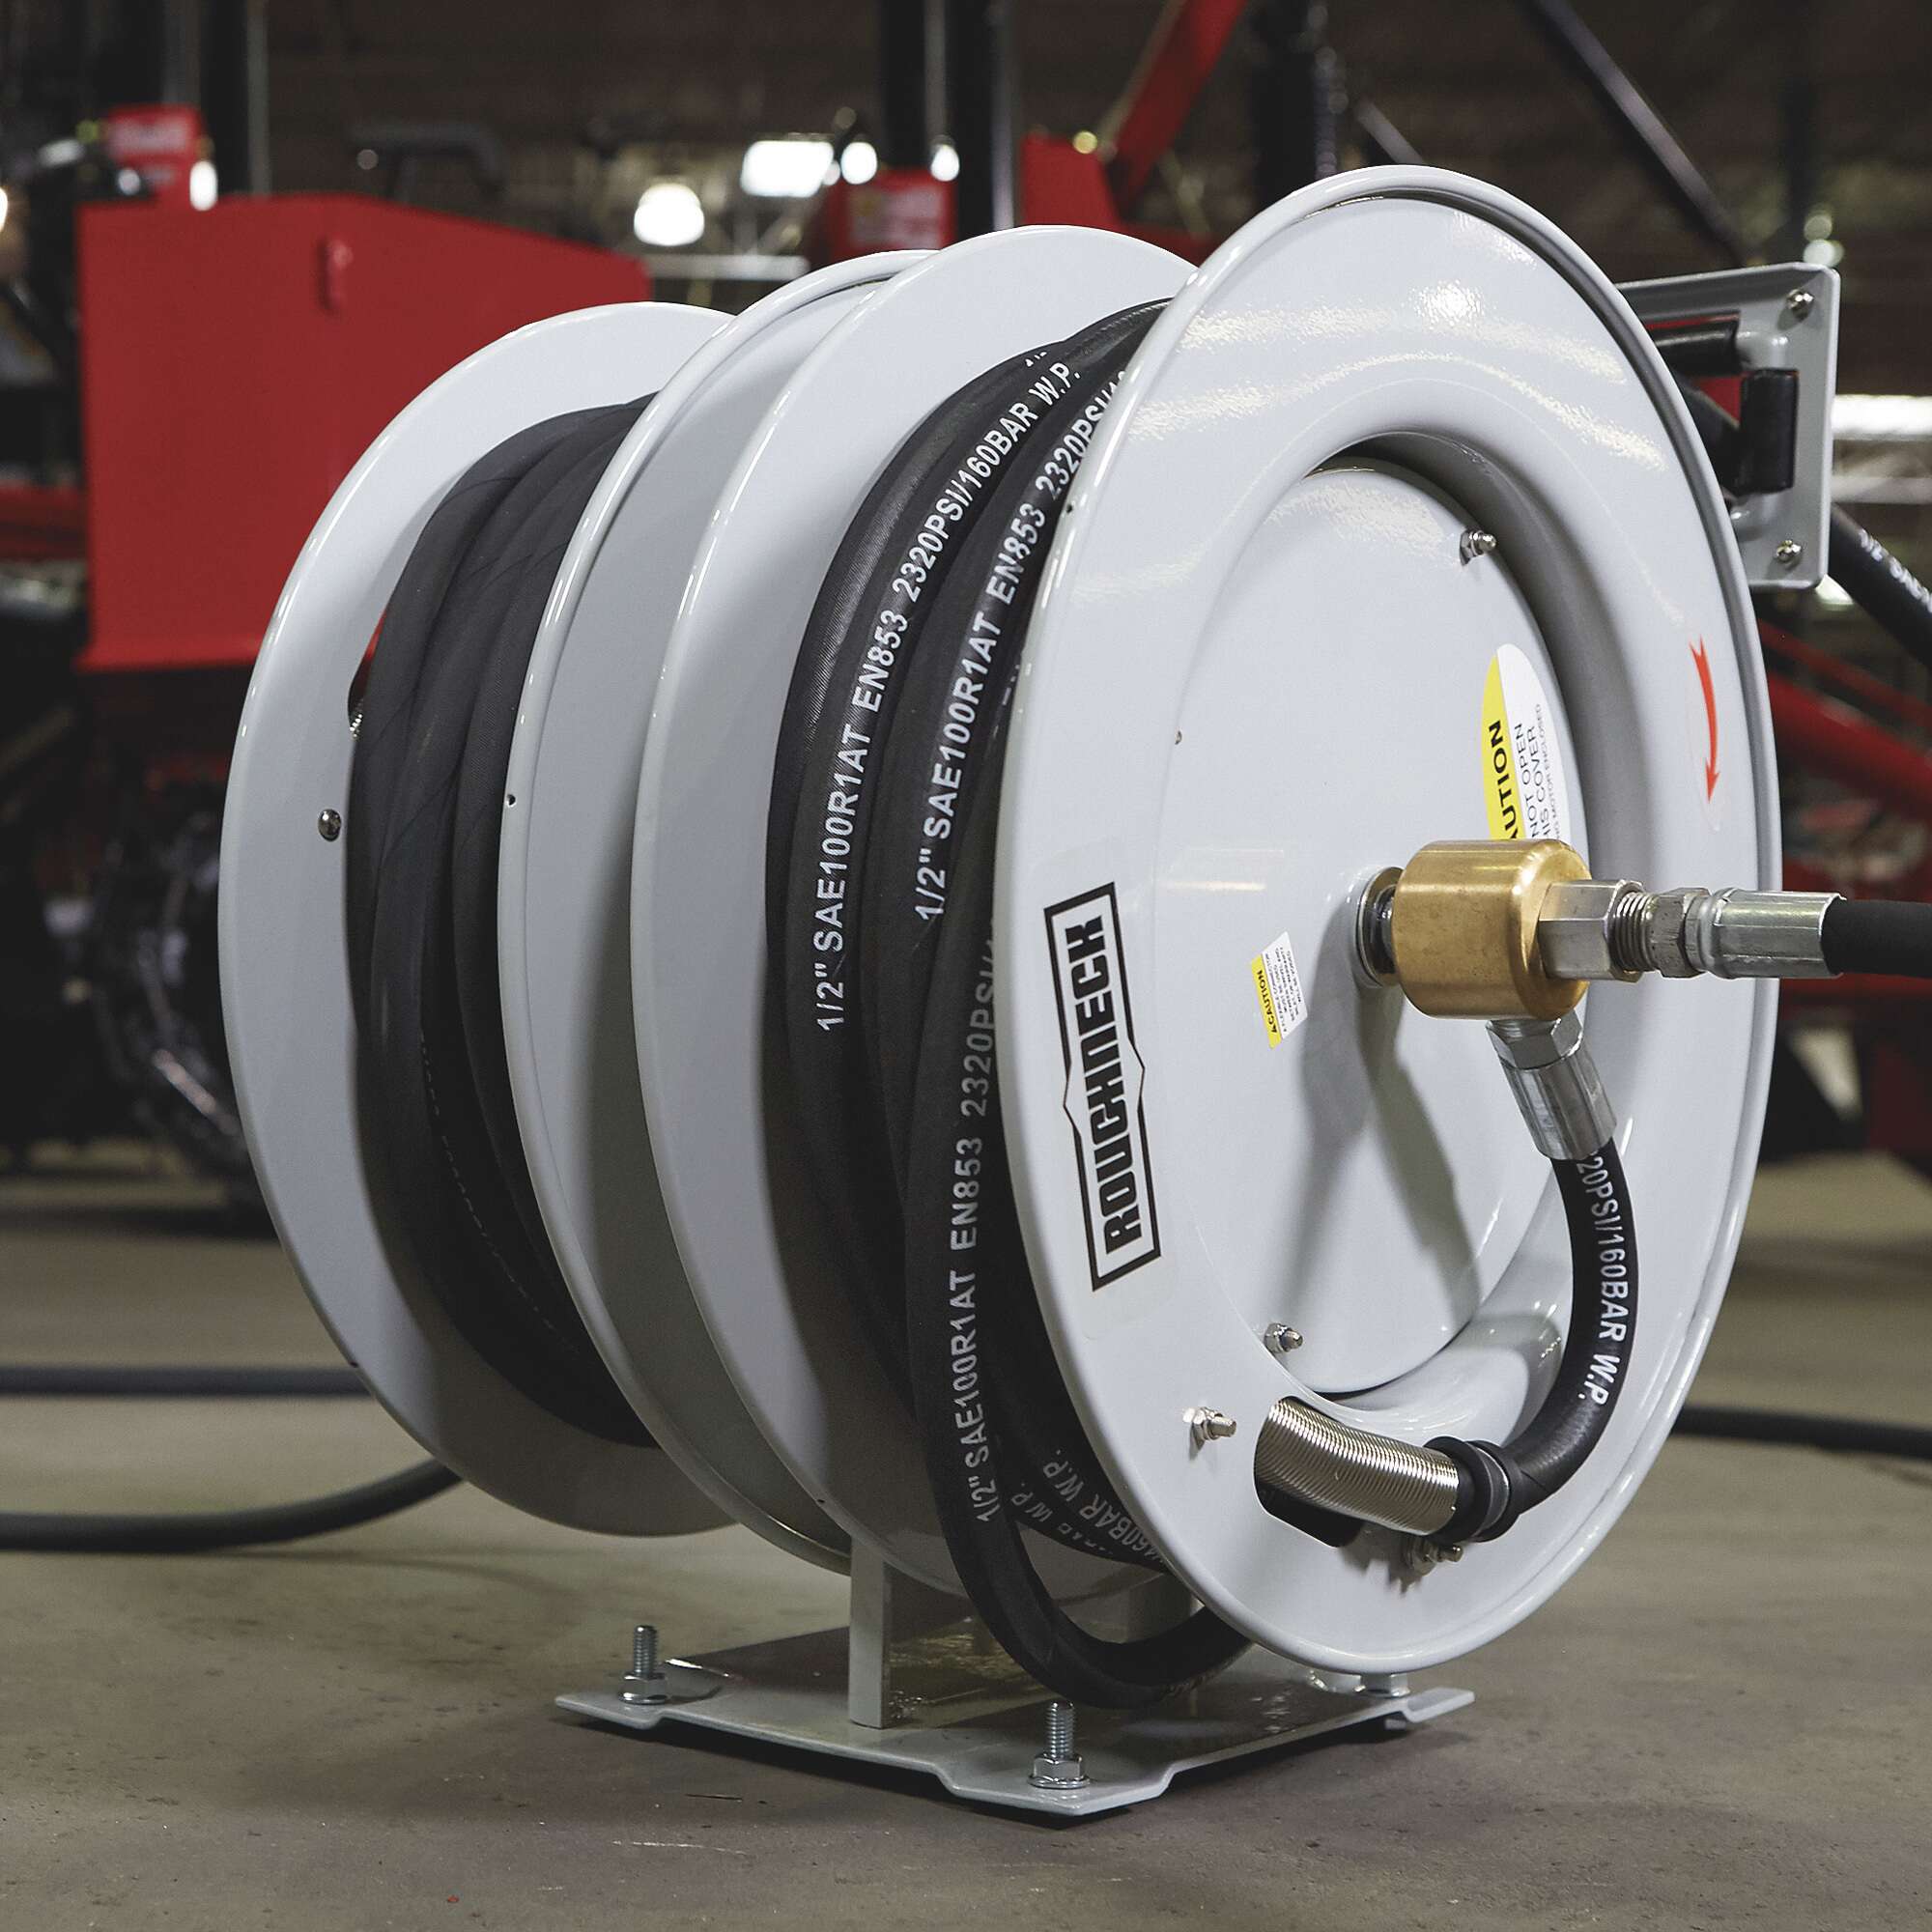 Roughneck Dual Grease/Oil Hose Reel with 50ft. Hoses, 1/4in. x 50ft. Grease  Hose, 1/2in. x 50ft. Oil Hose